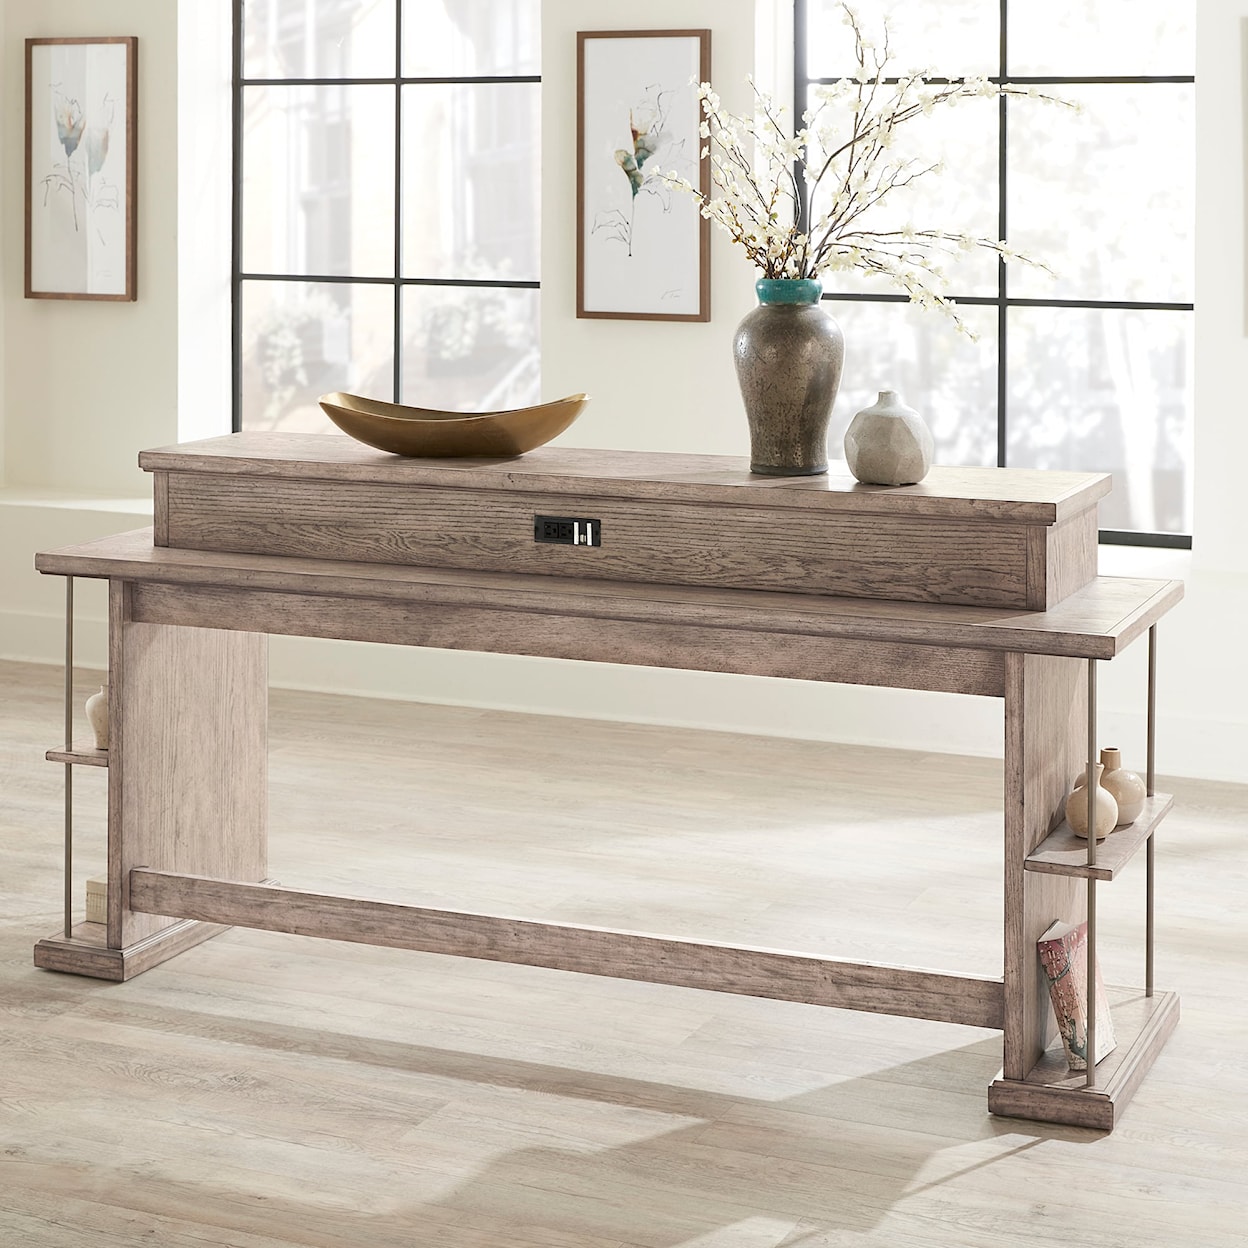 Liberty Furniture City Scape Console Bar Table